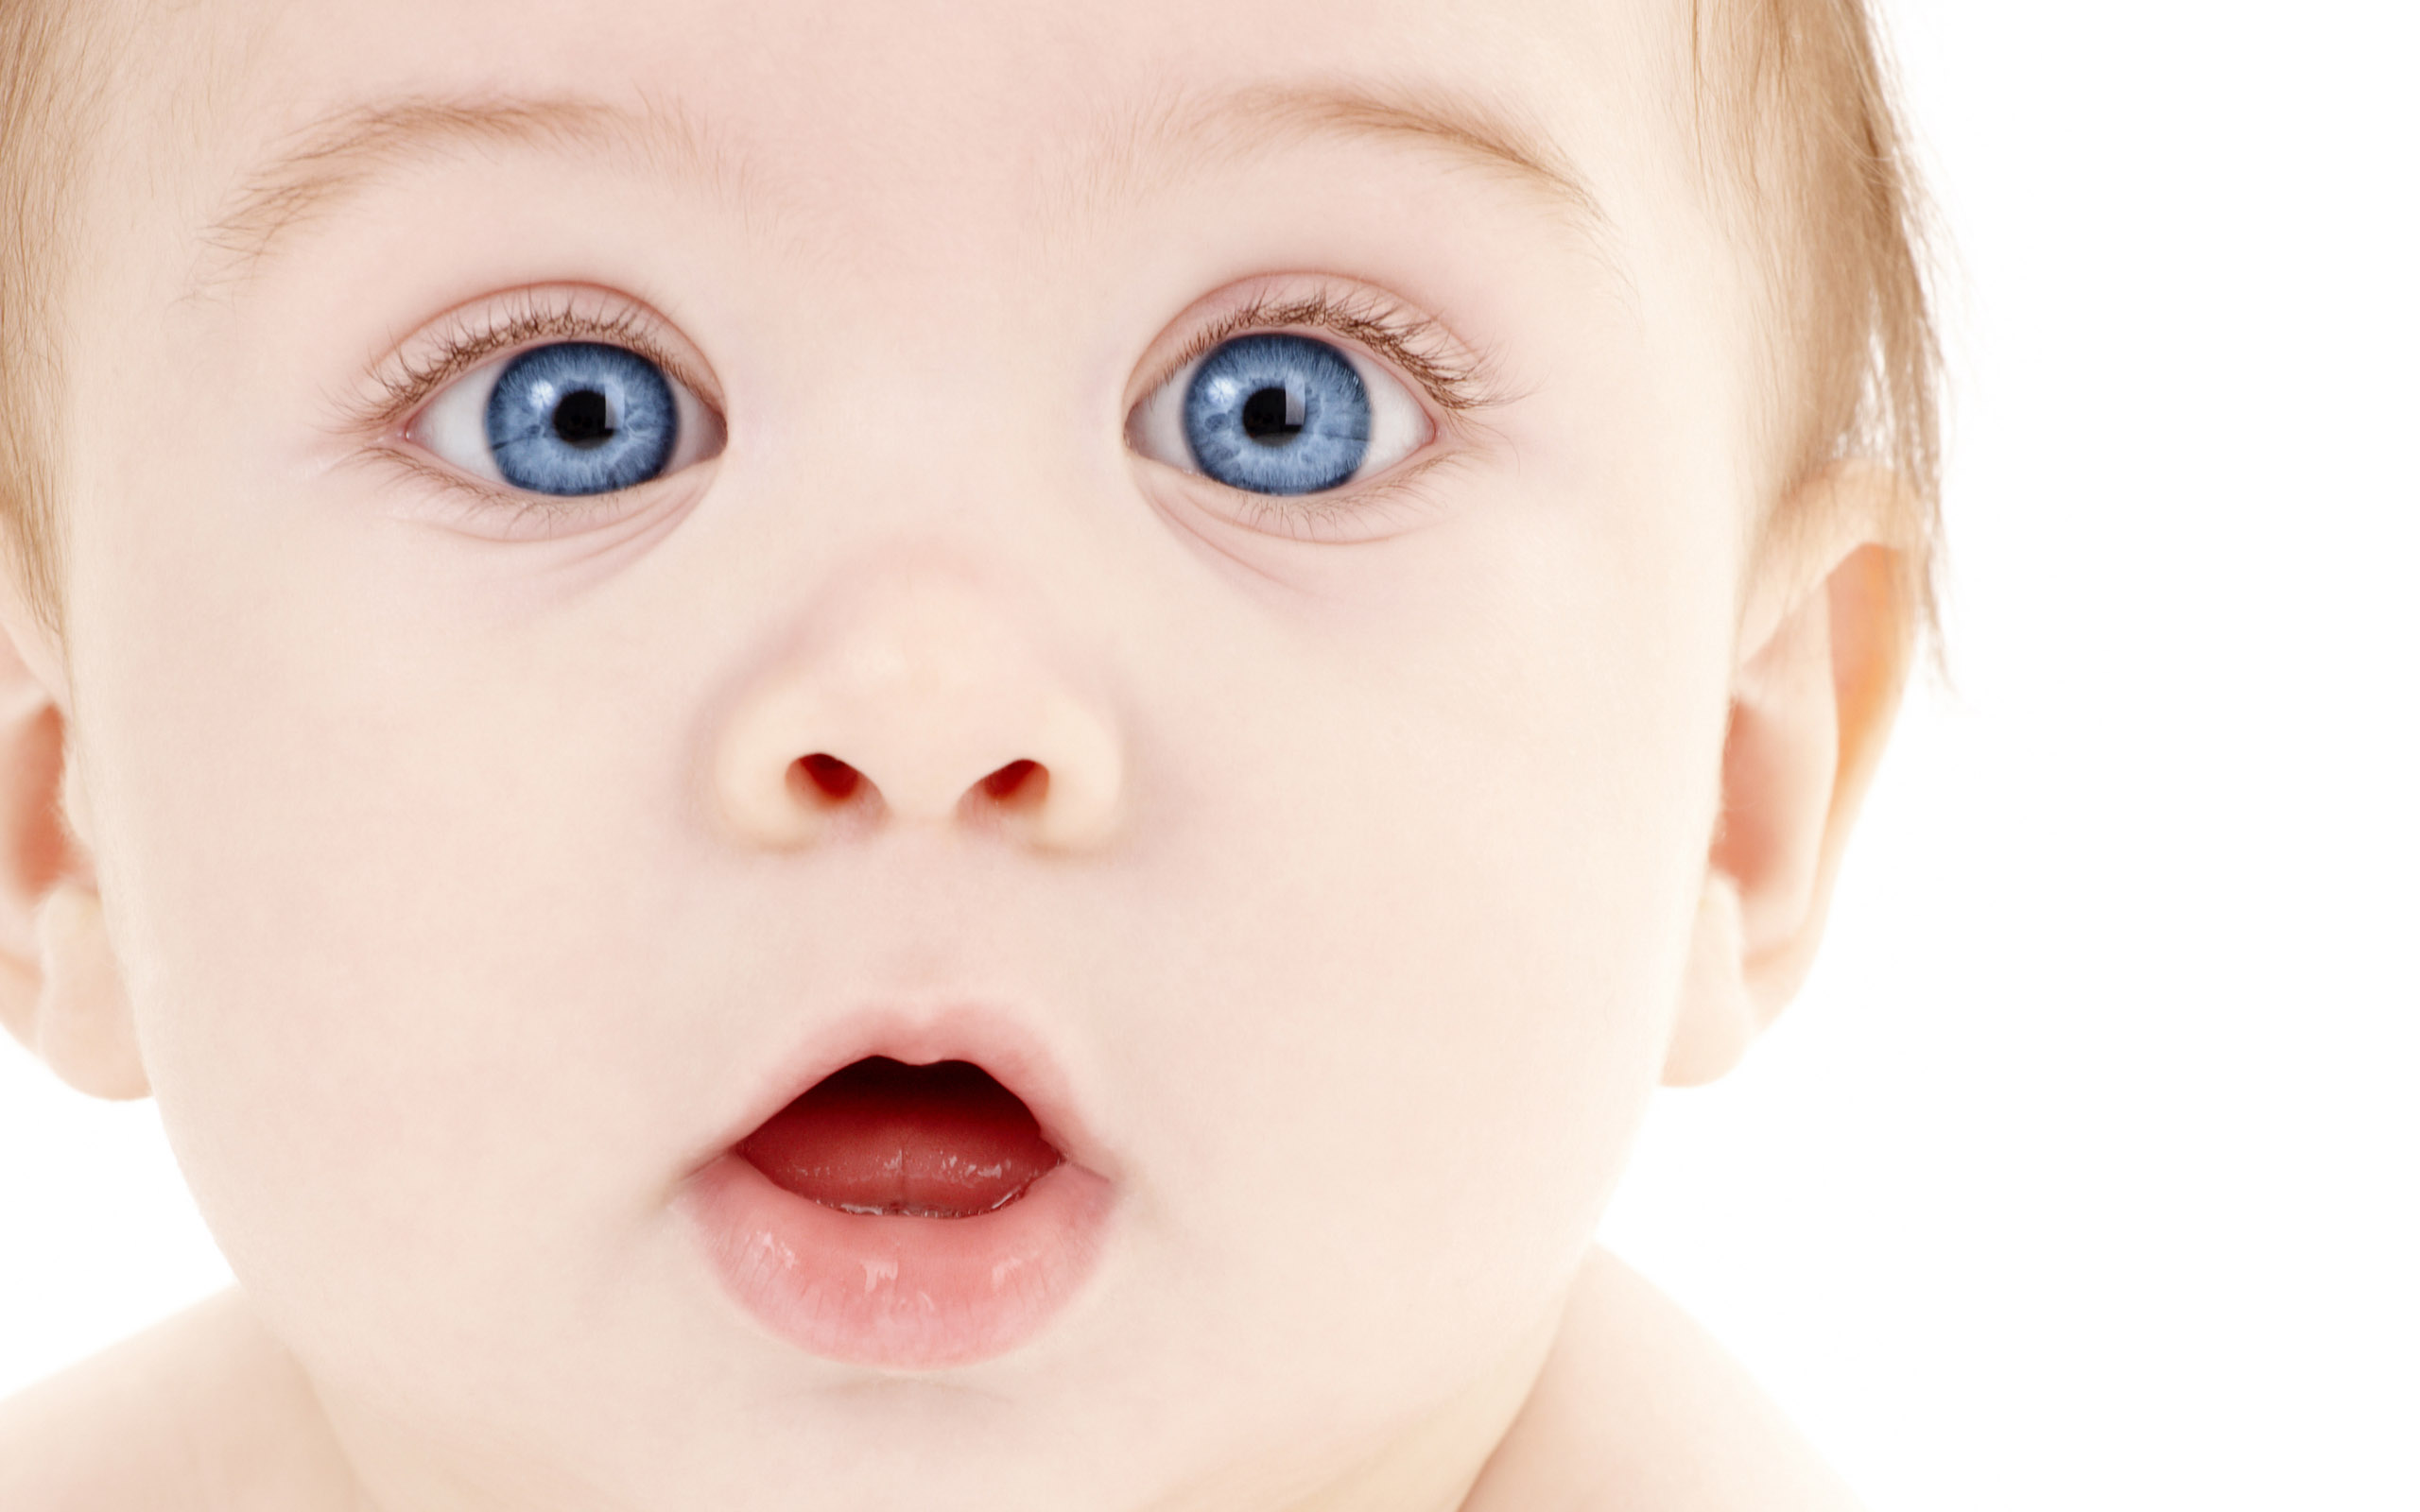 wallpaper_of_cute_baby_a_blue_eyes_baby_